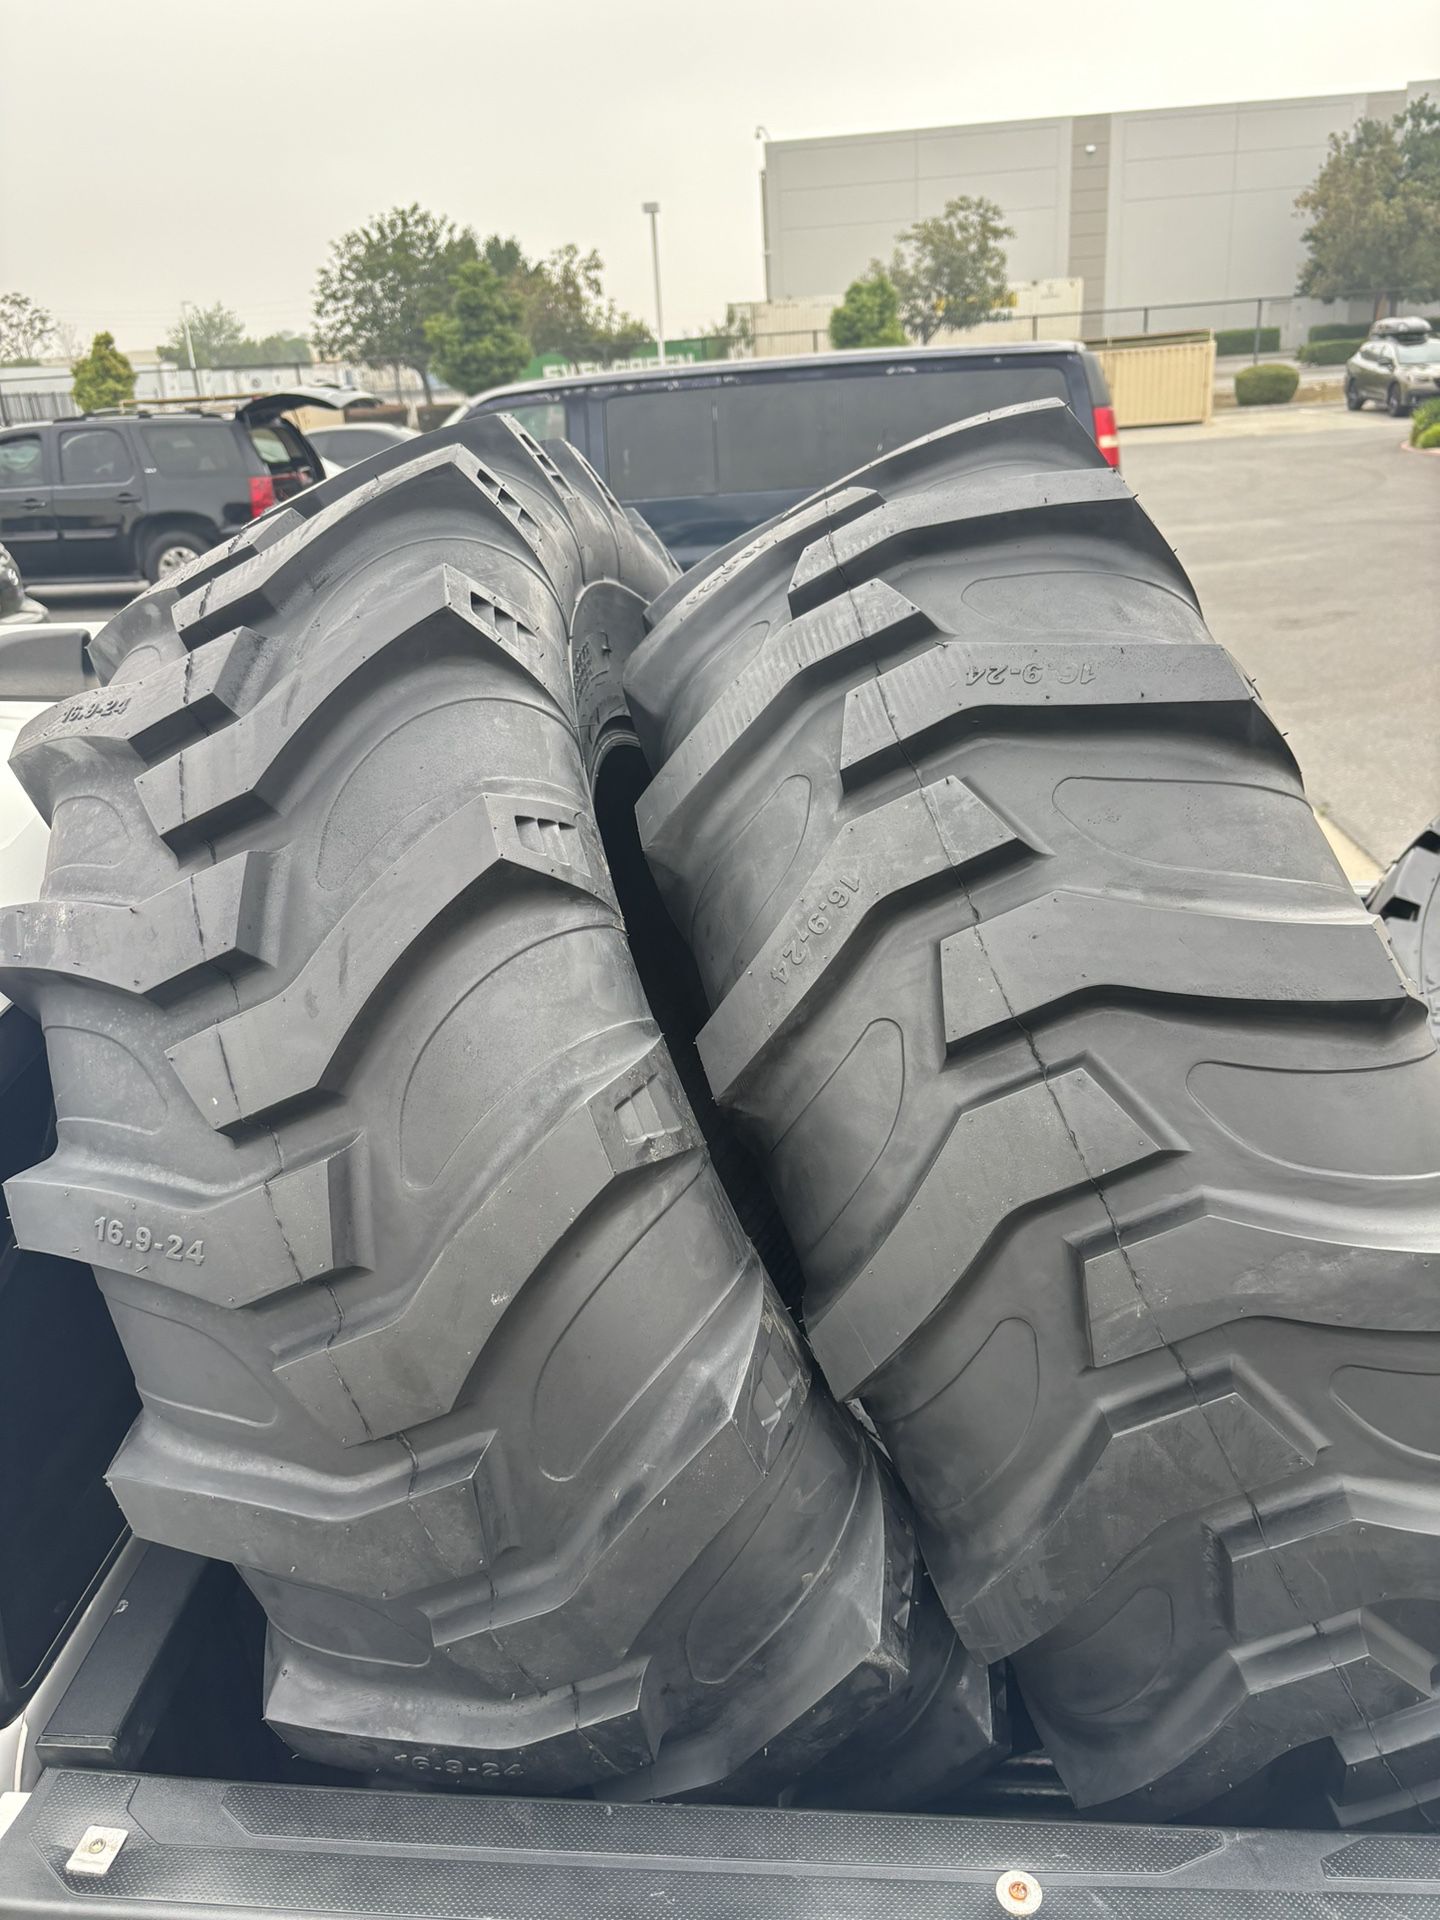 Set Of 2 Duromax Tractor Tires 16.9x24 $1200 